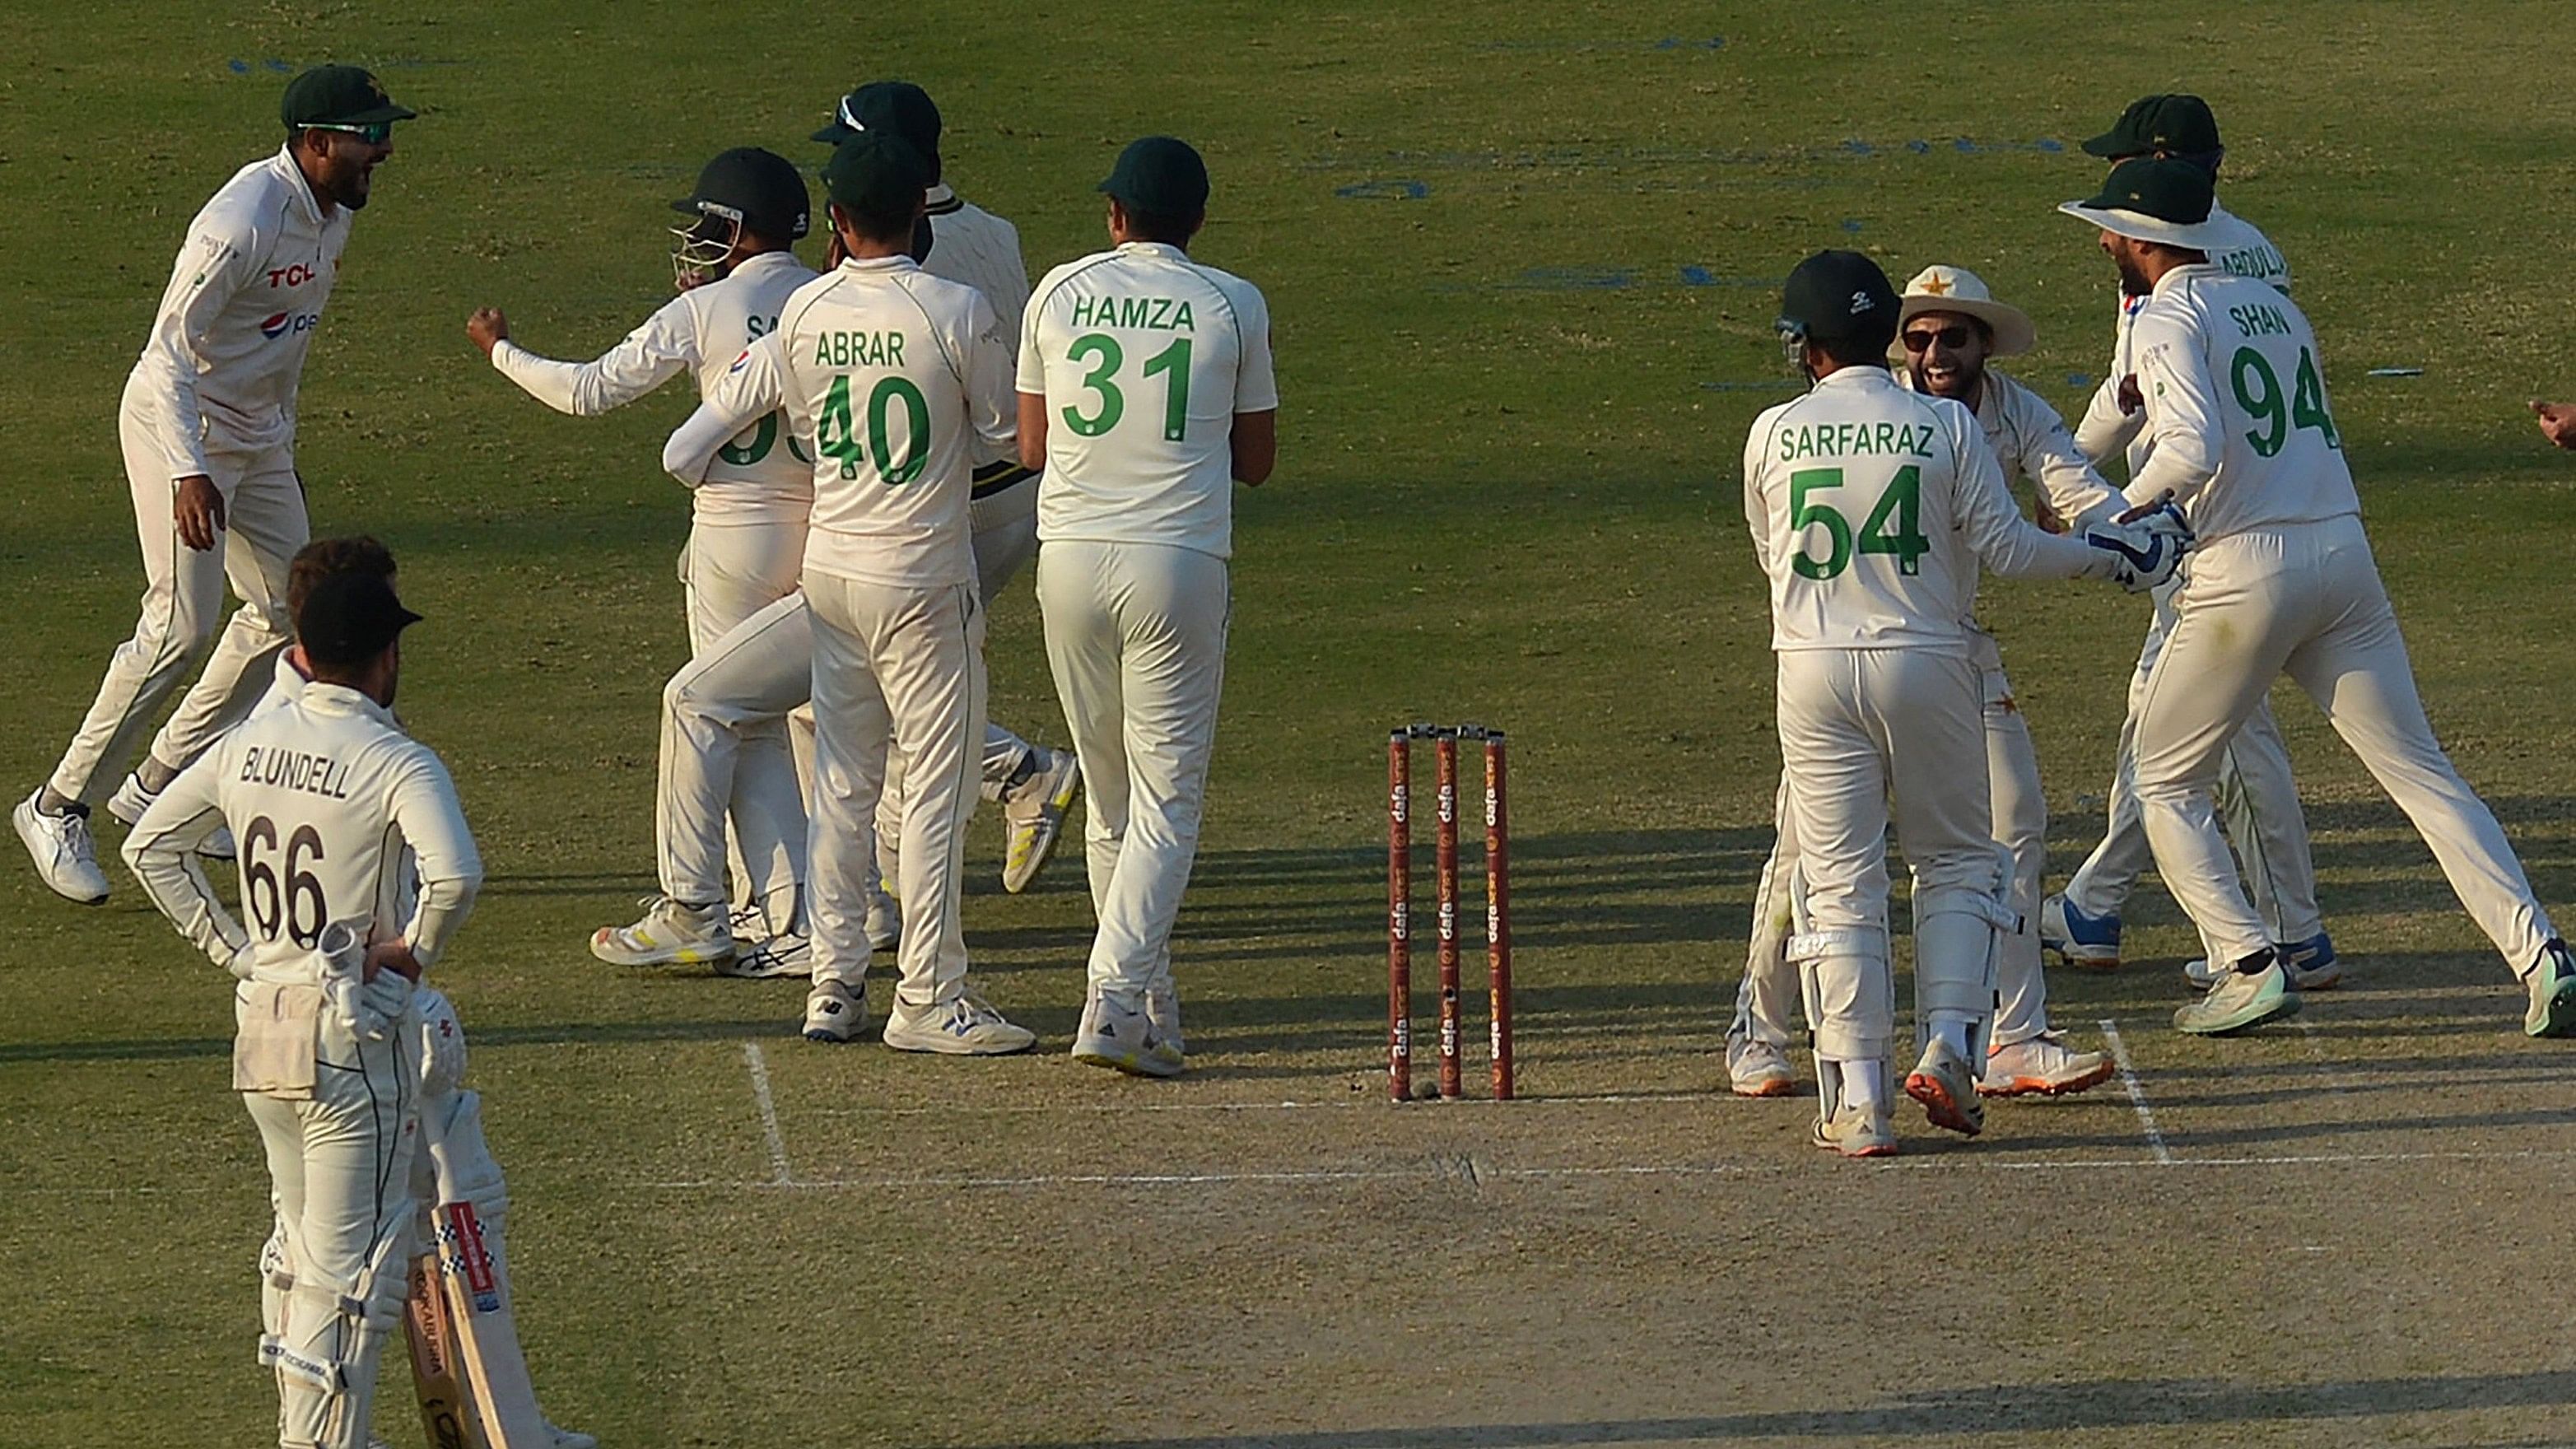 Pakistan's players celebrate after the dismissal of New Zealand's Henry Nicholls. Credit: AFP Photo